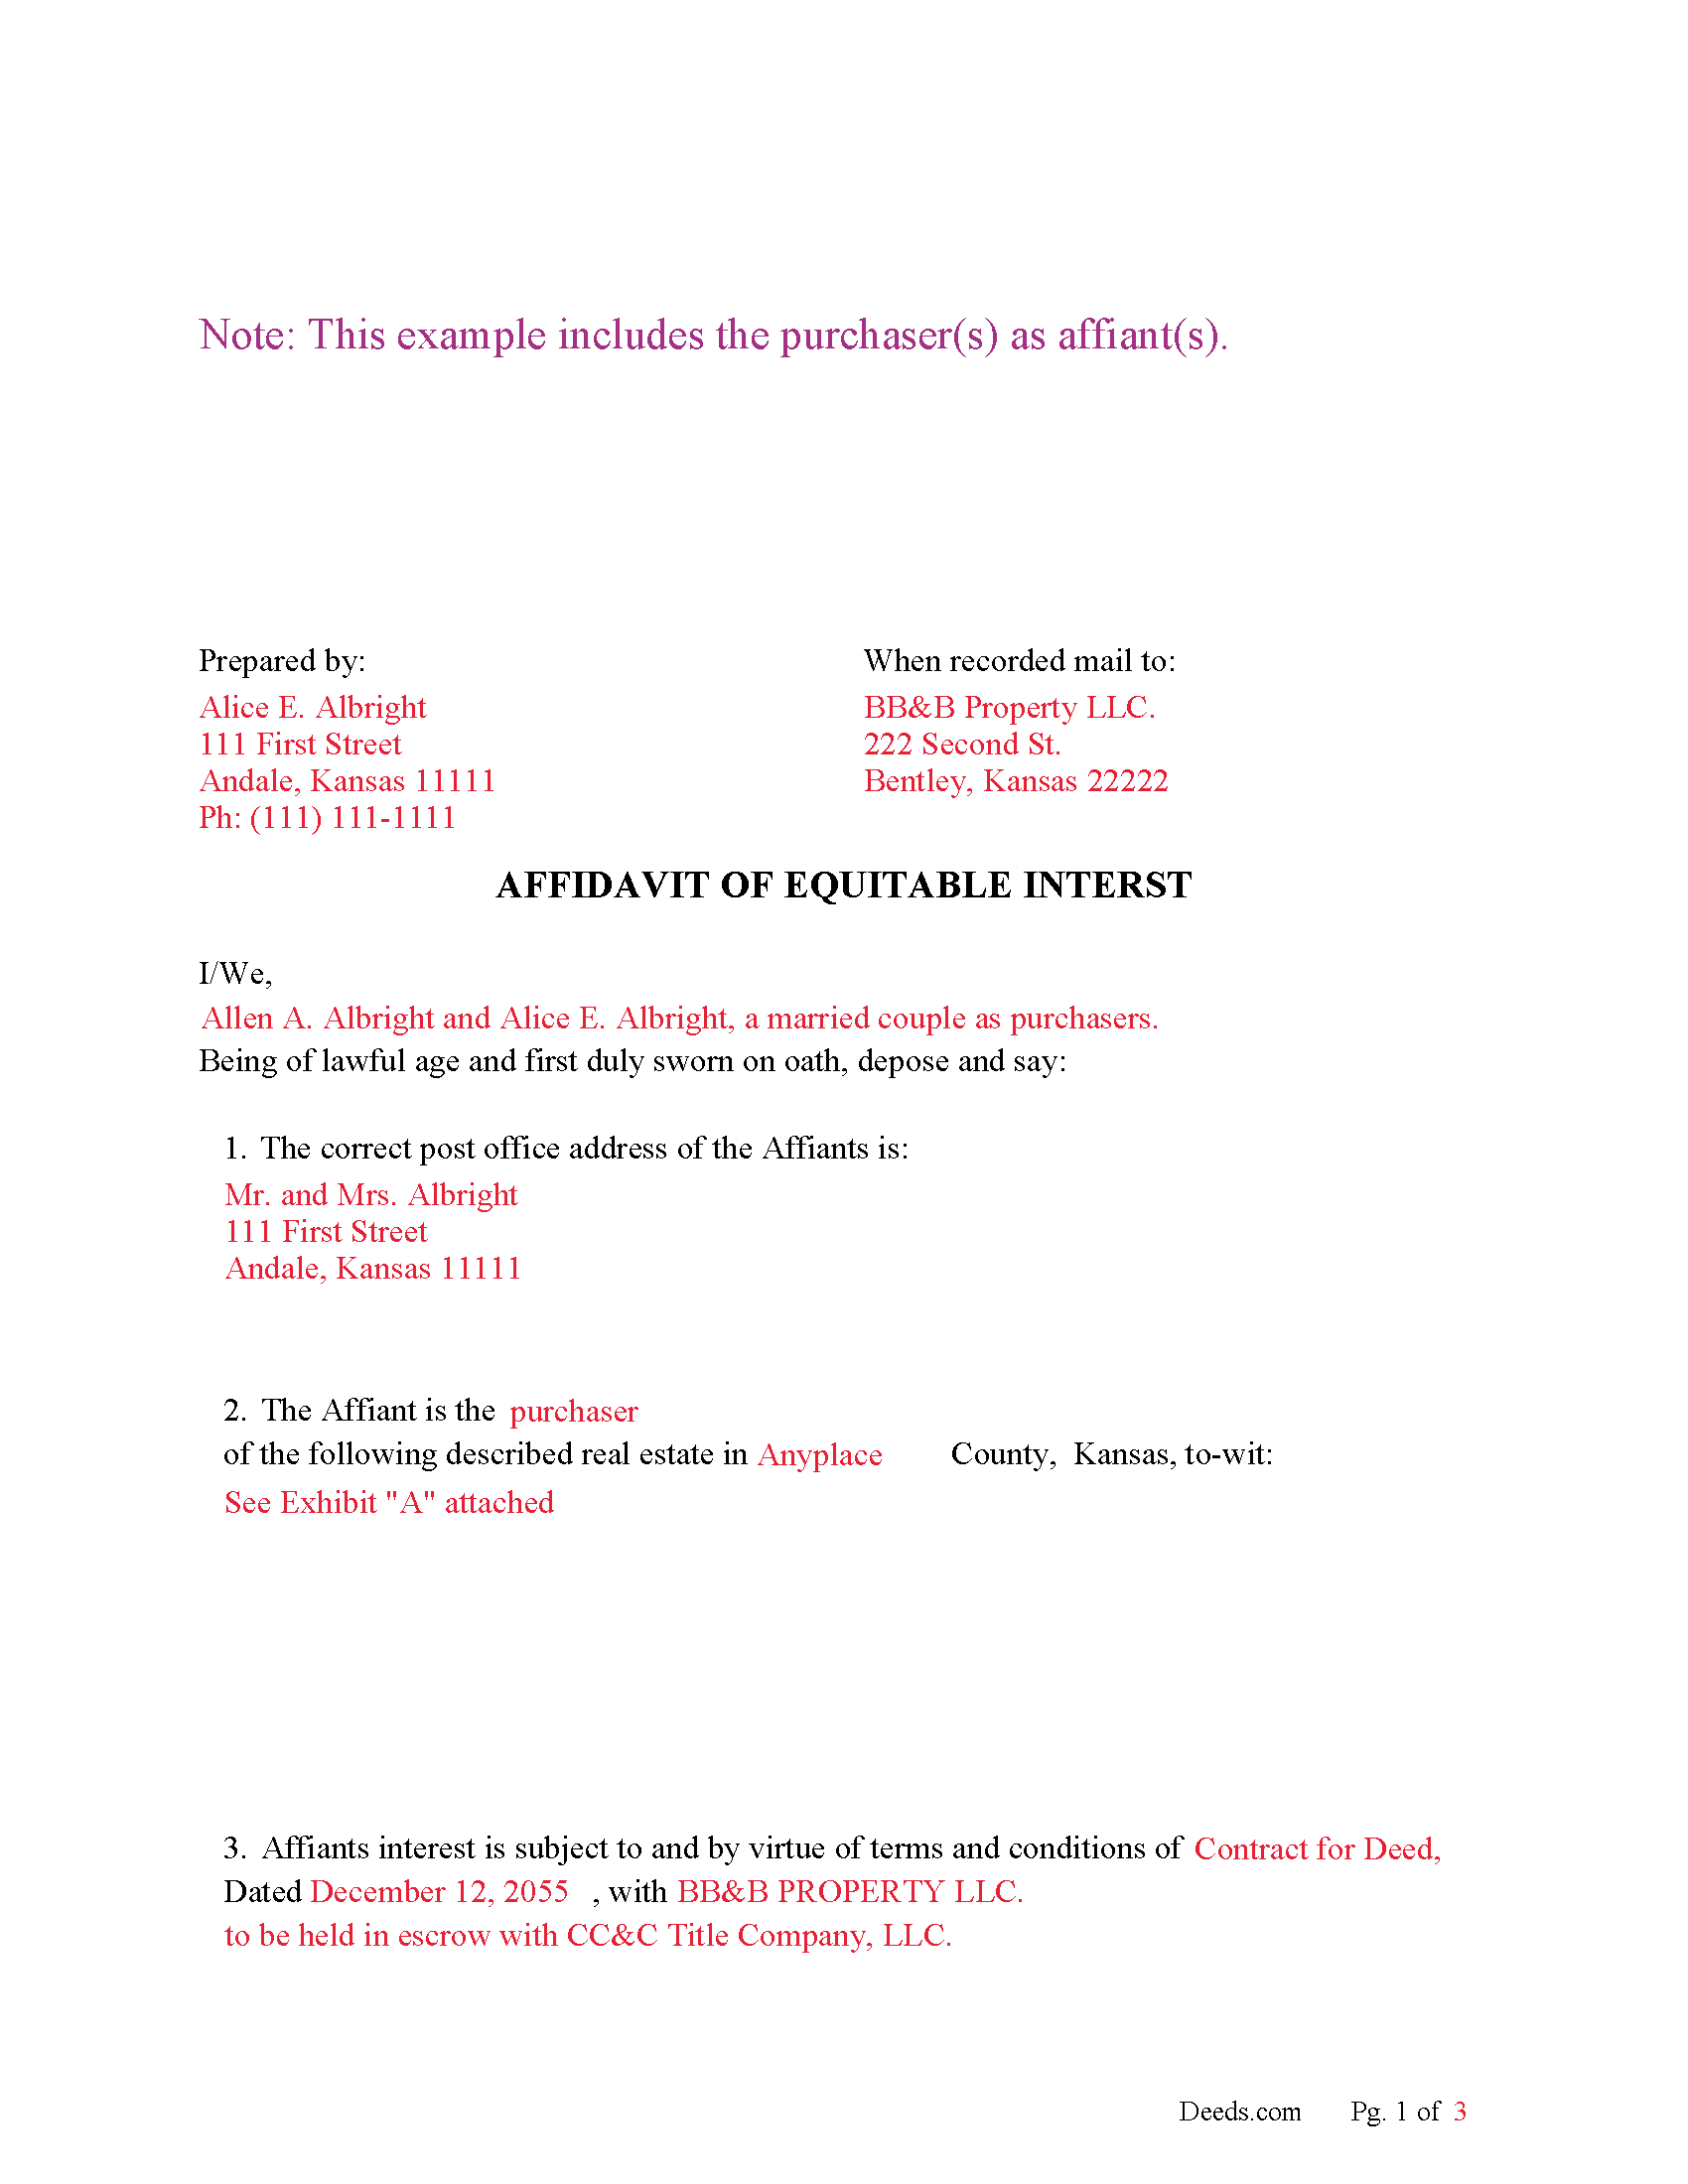 Completed Example of the Affidavit for Equitable Interest Document